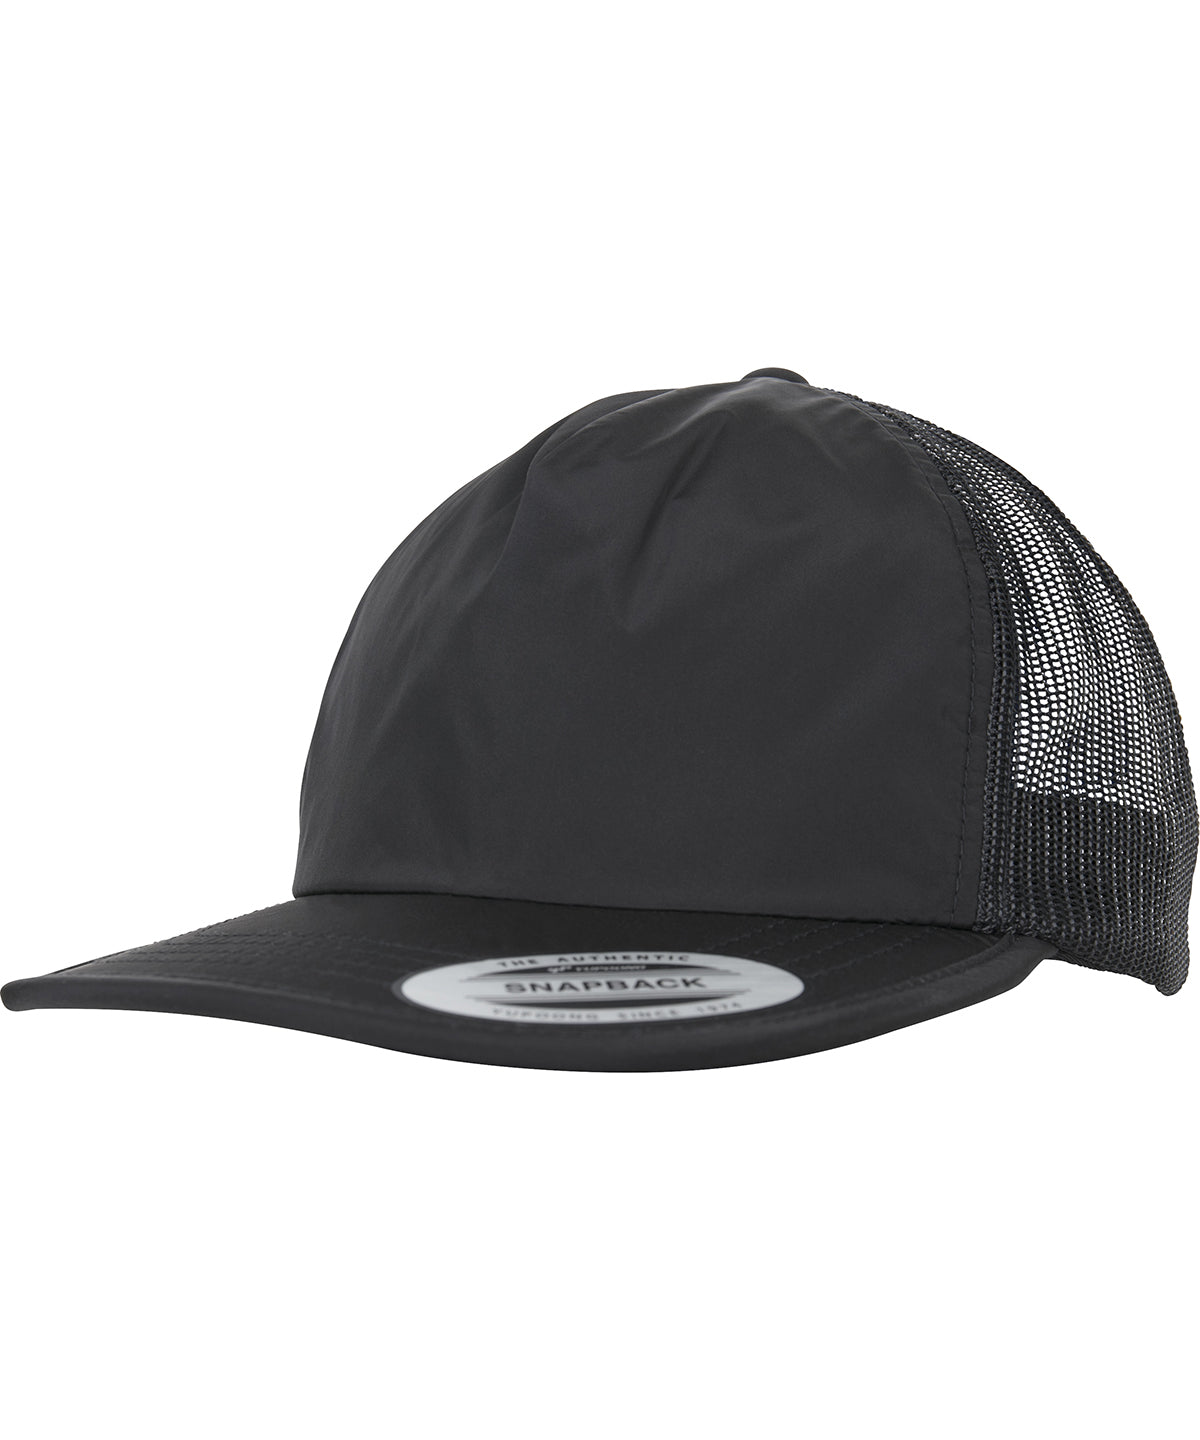 Flexfit by Yupoong Unstructured trucker cap